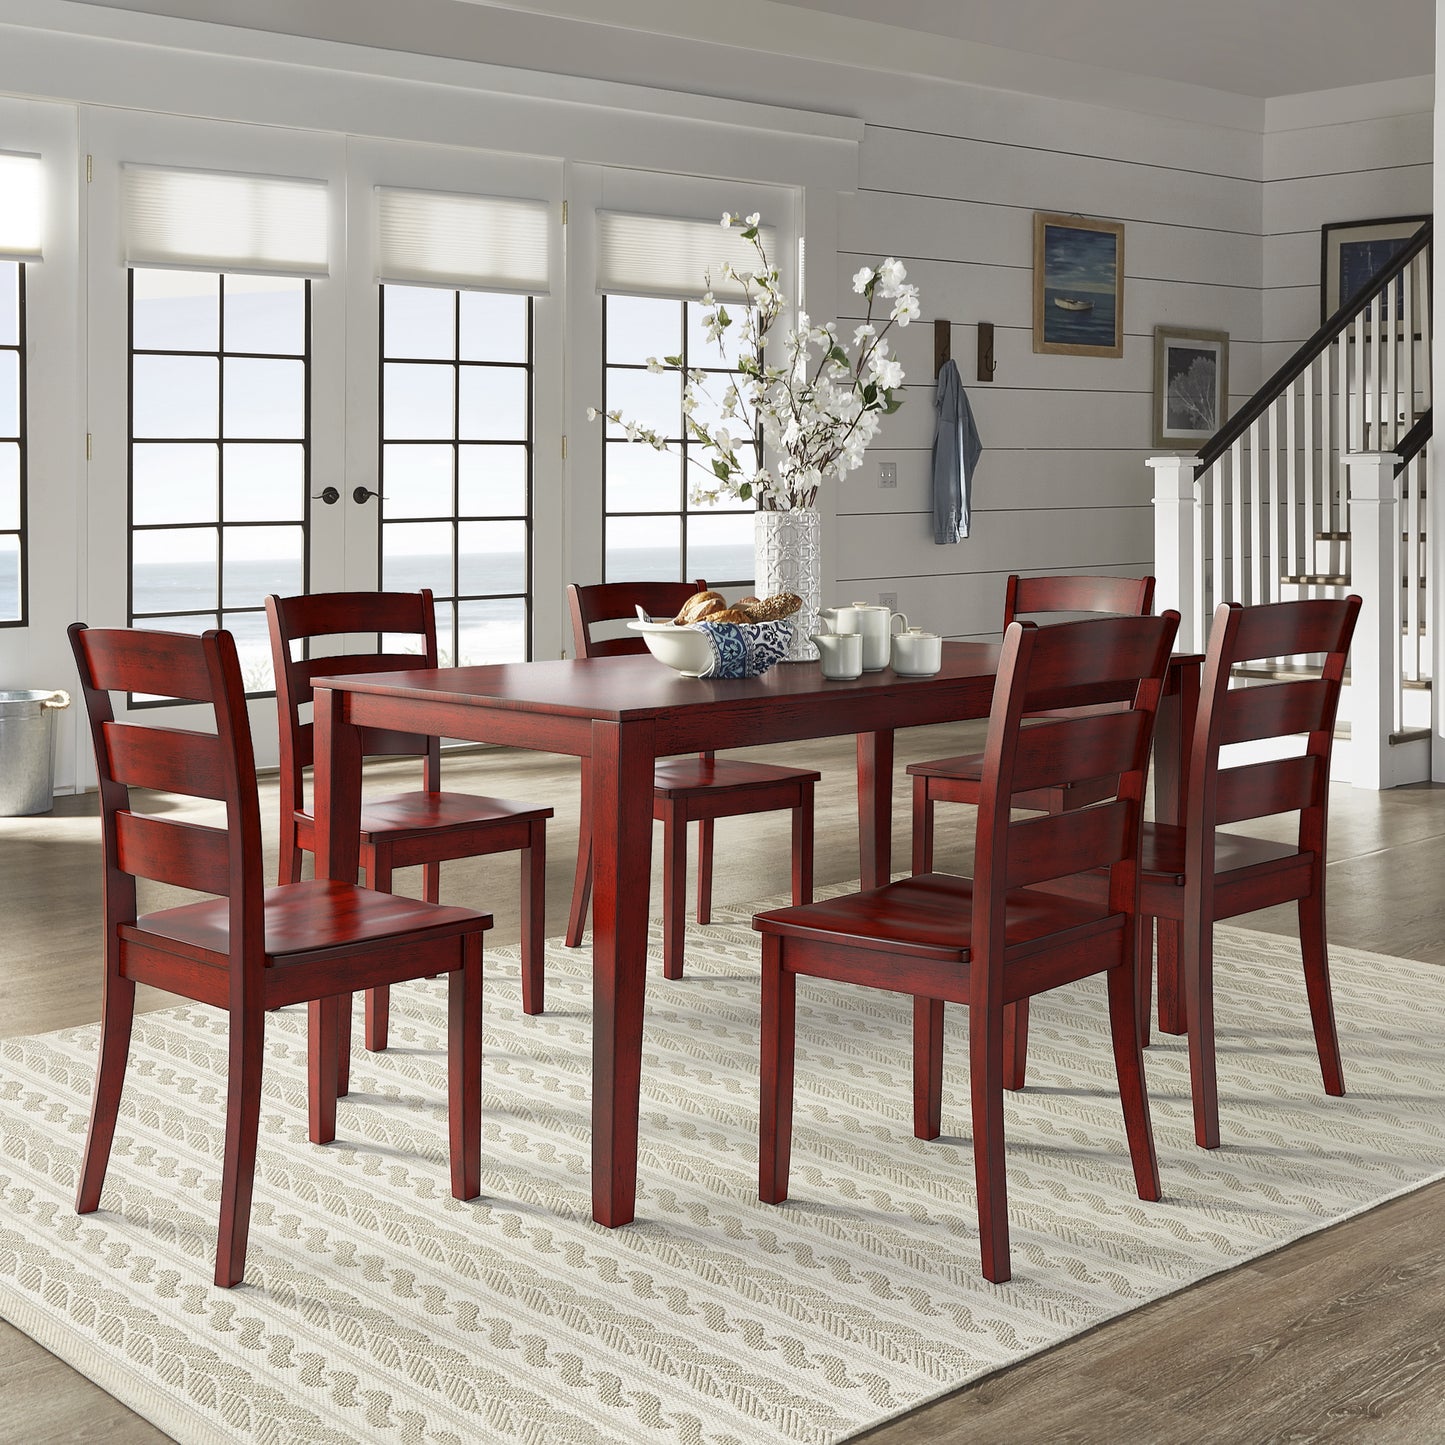 60-inch Rectangular Antique Berry Red Dining Set - Ladder Back Chairs, 7-Piece Set